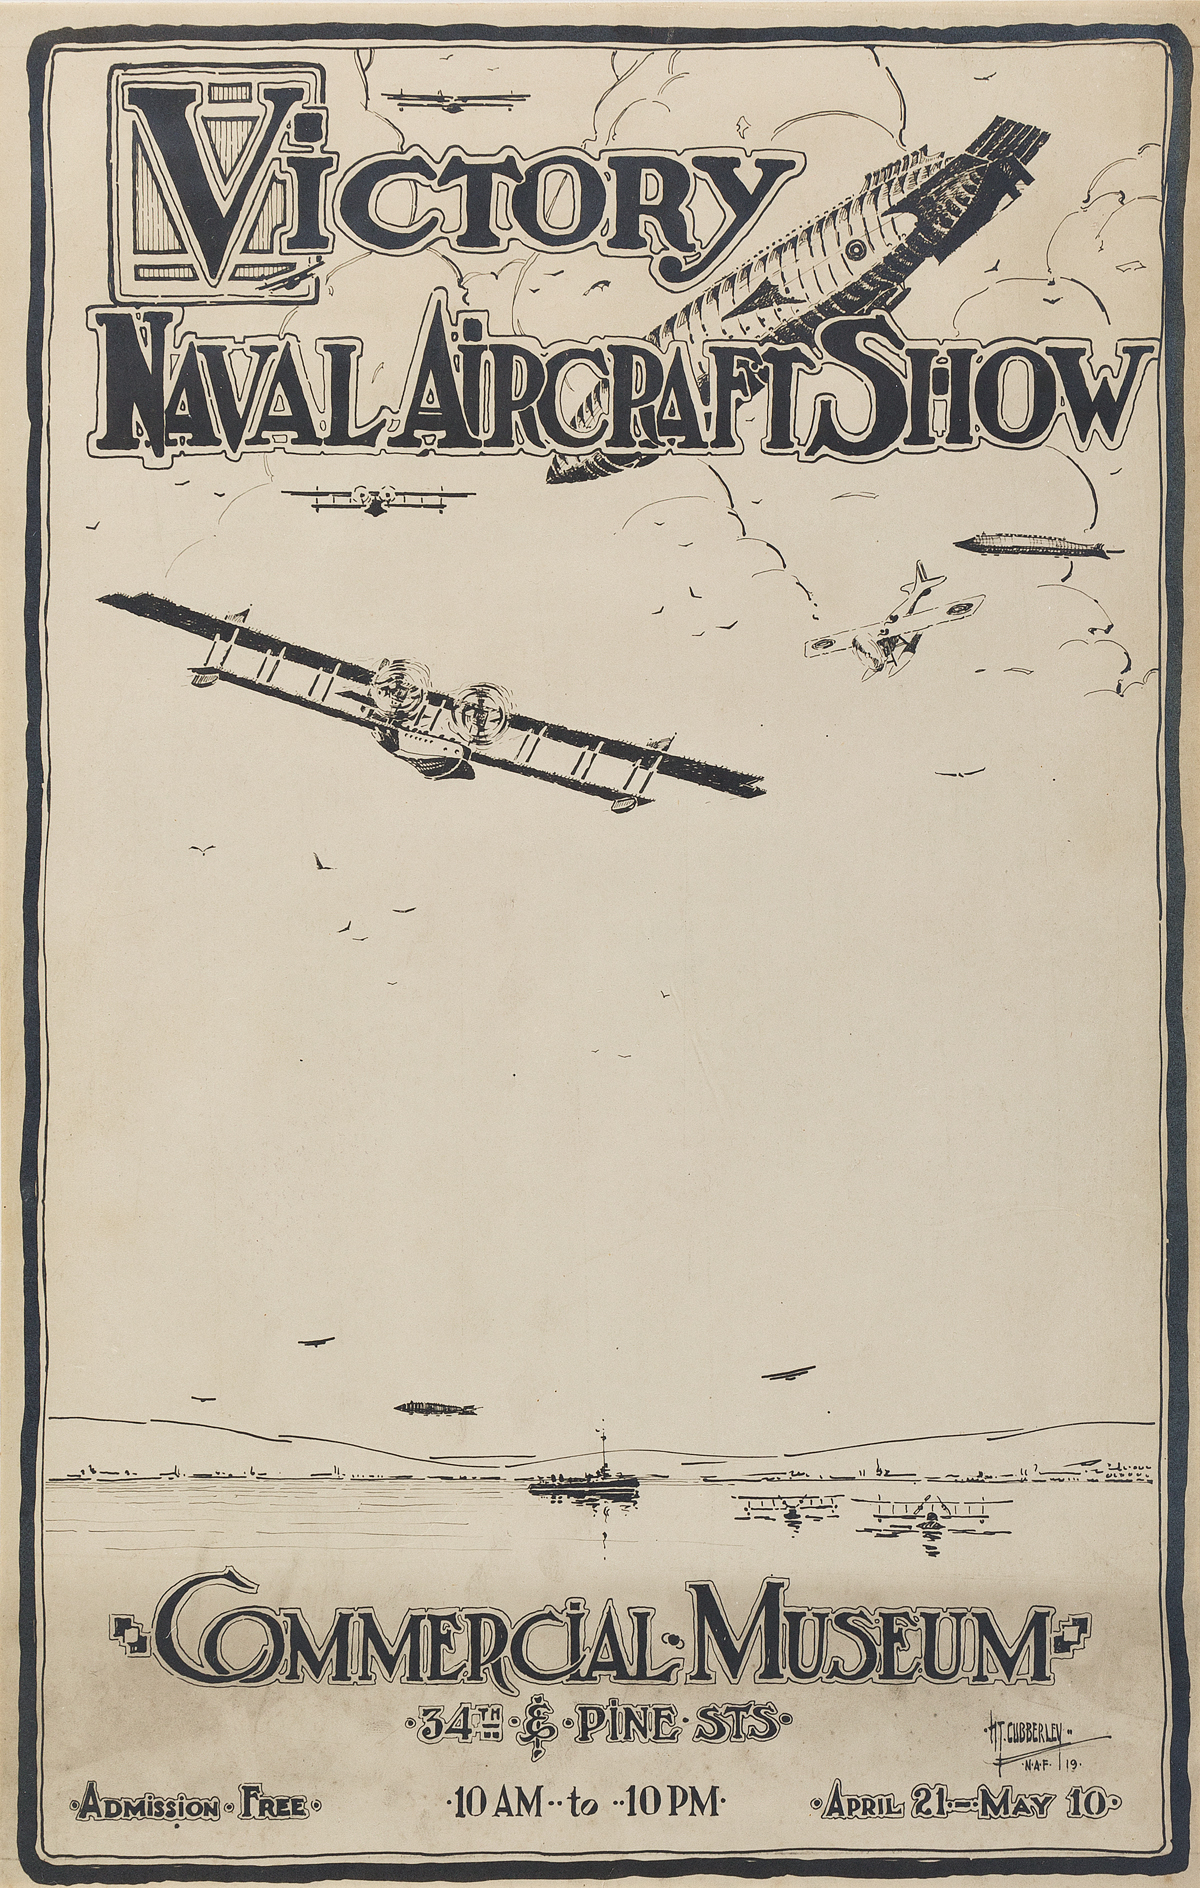 H.T. CUBBERLEY (DATES UNKNOWN). VICTORY NAVAL AVIATION SHOW / COMMERCIAL MUSEUM. Small format poster. 1919. 17x11 inches, 45x28 cm.